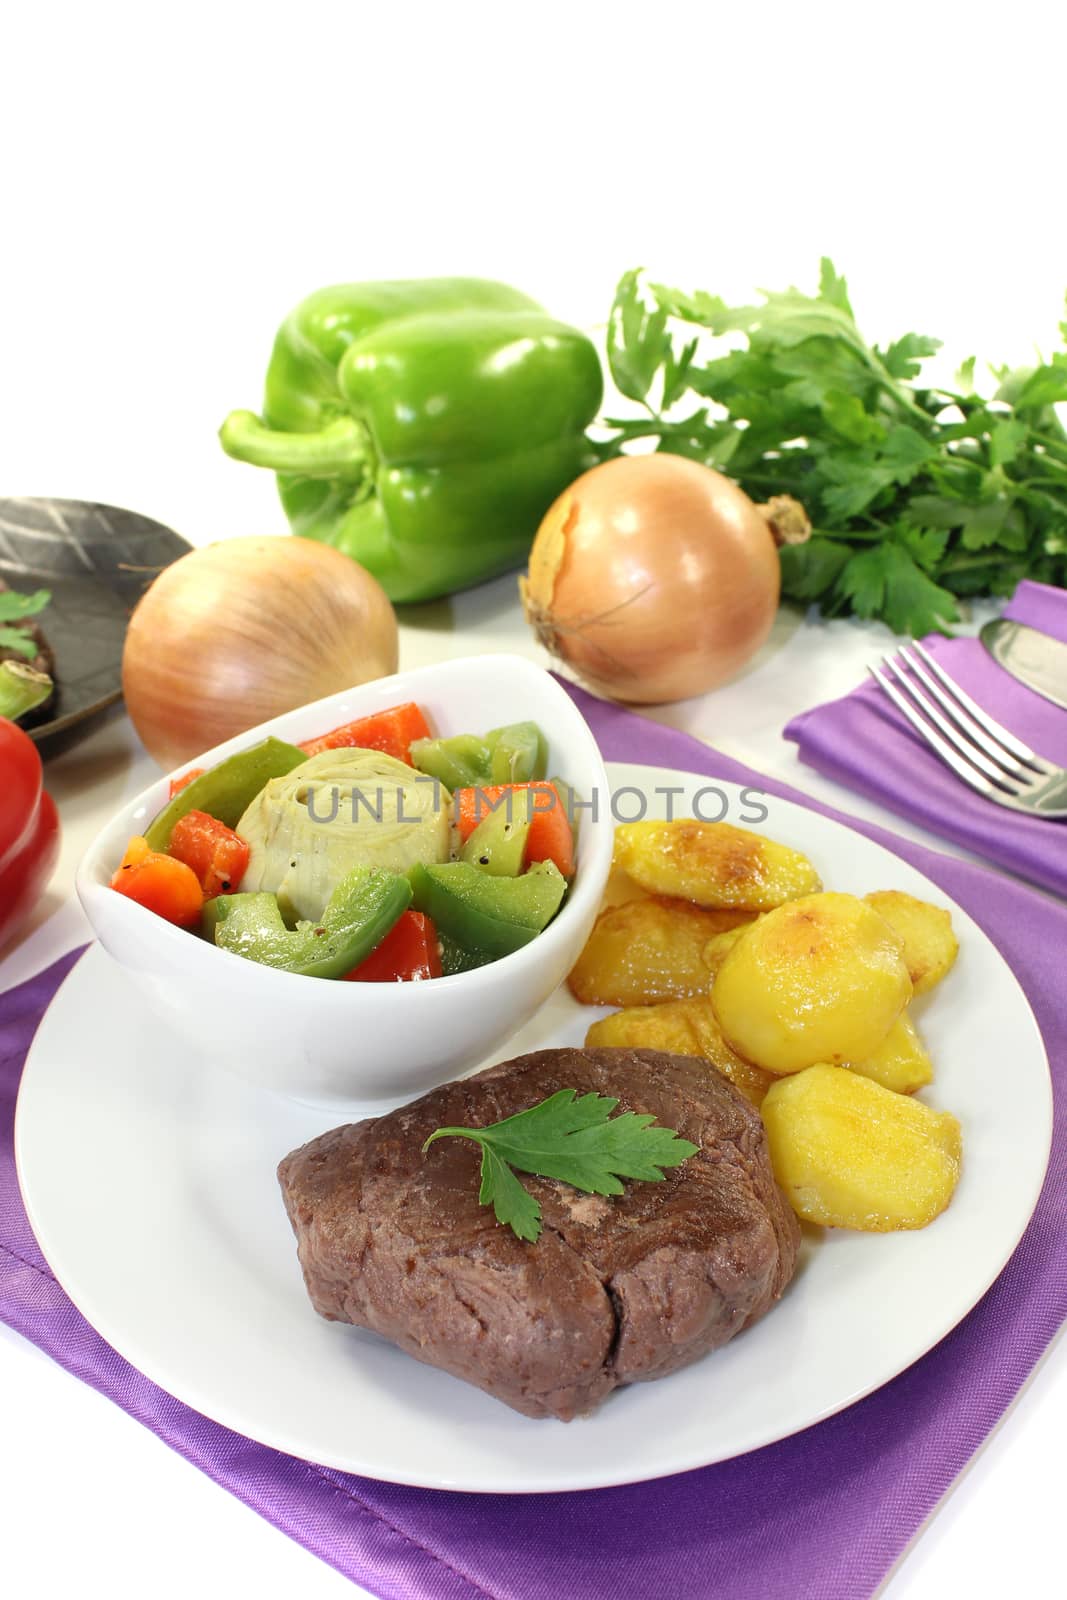 Ostrich steaks with baked potatoes and vegetables on bright background